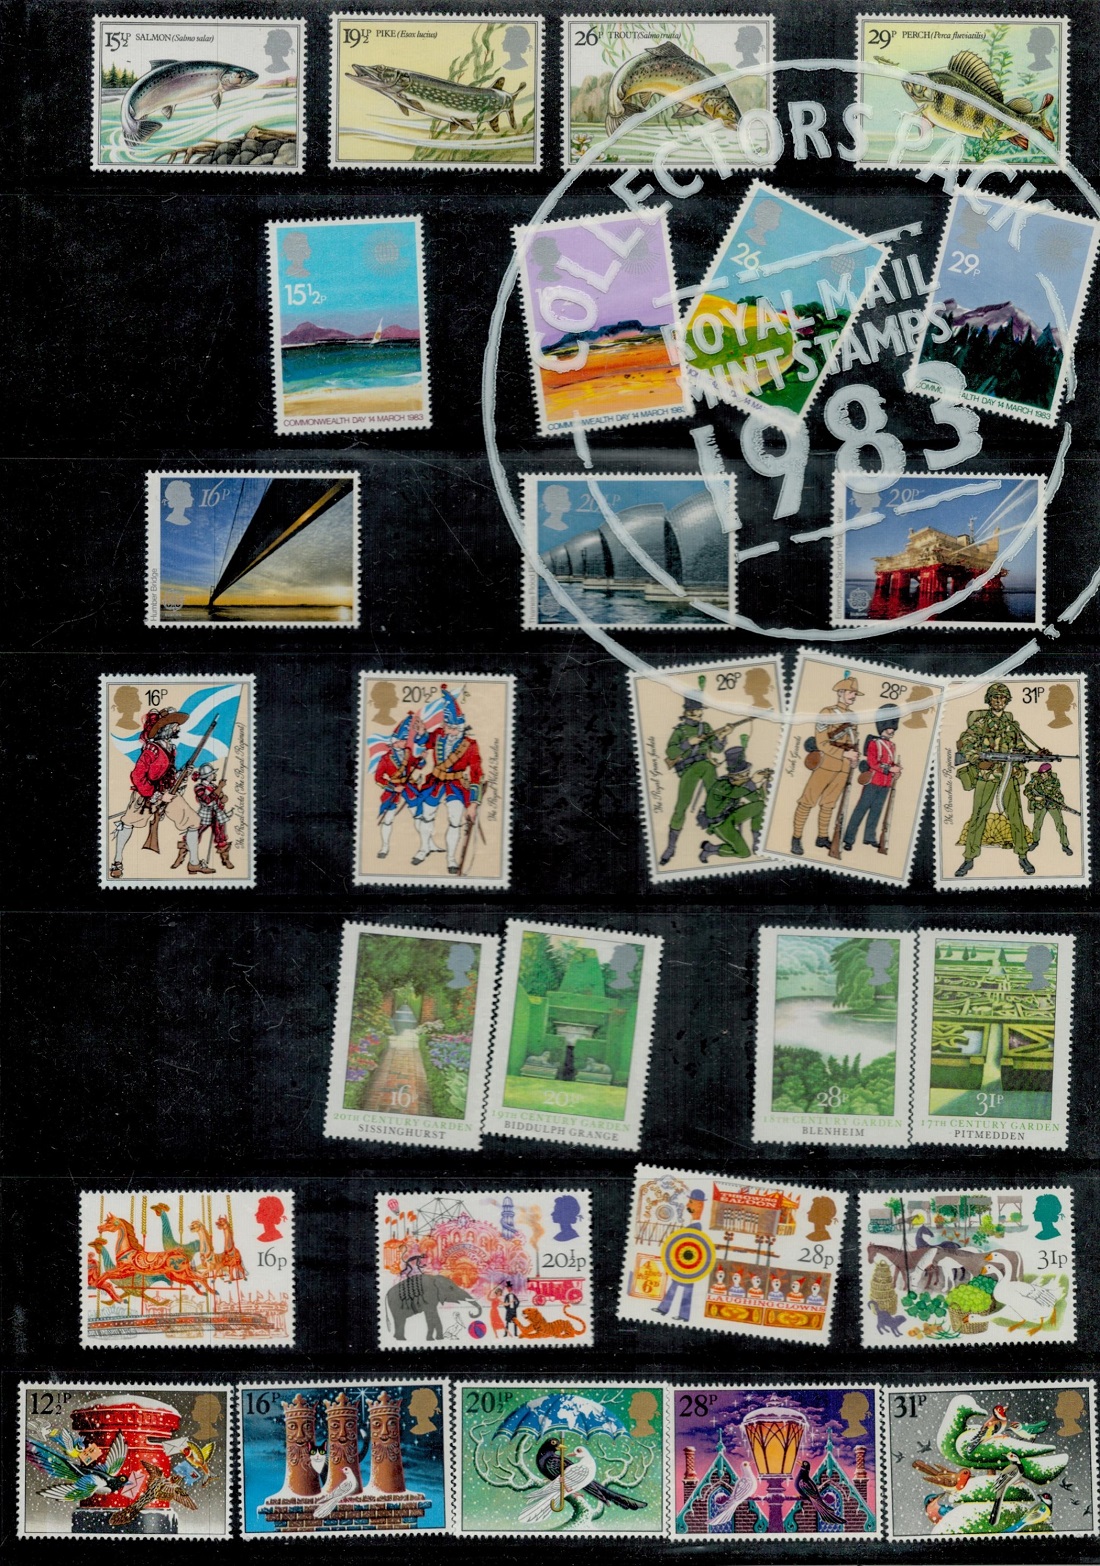 1983 Collectors Mint Stamps Year pack from The Royal Mail containing all Special UK Stamps from - Image 2 of 2